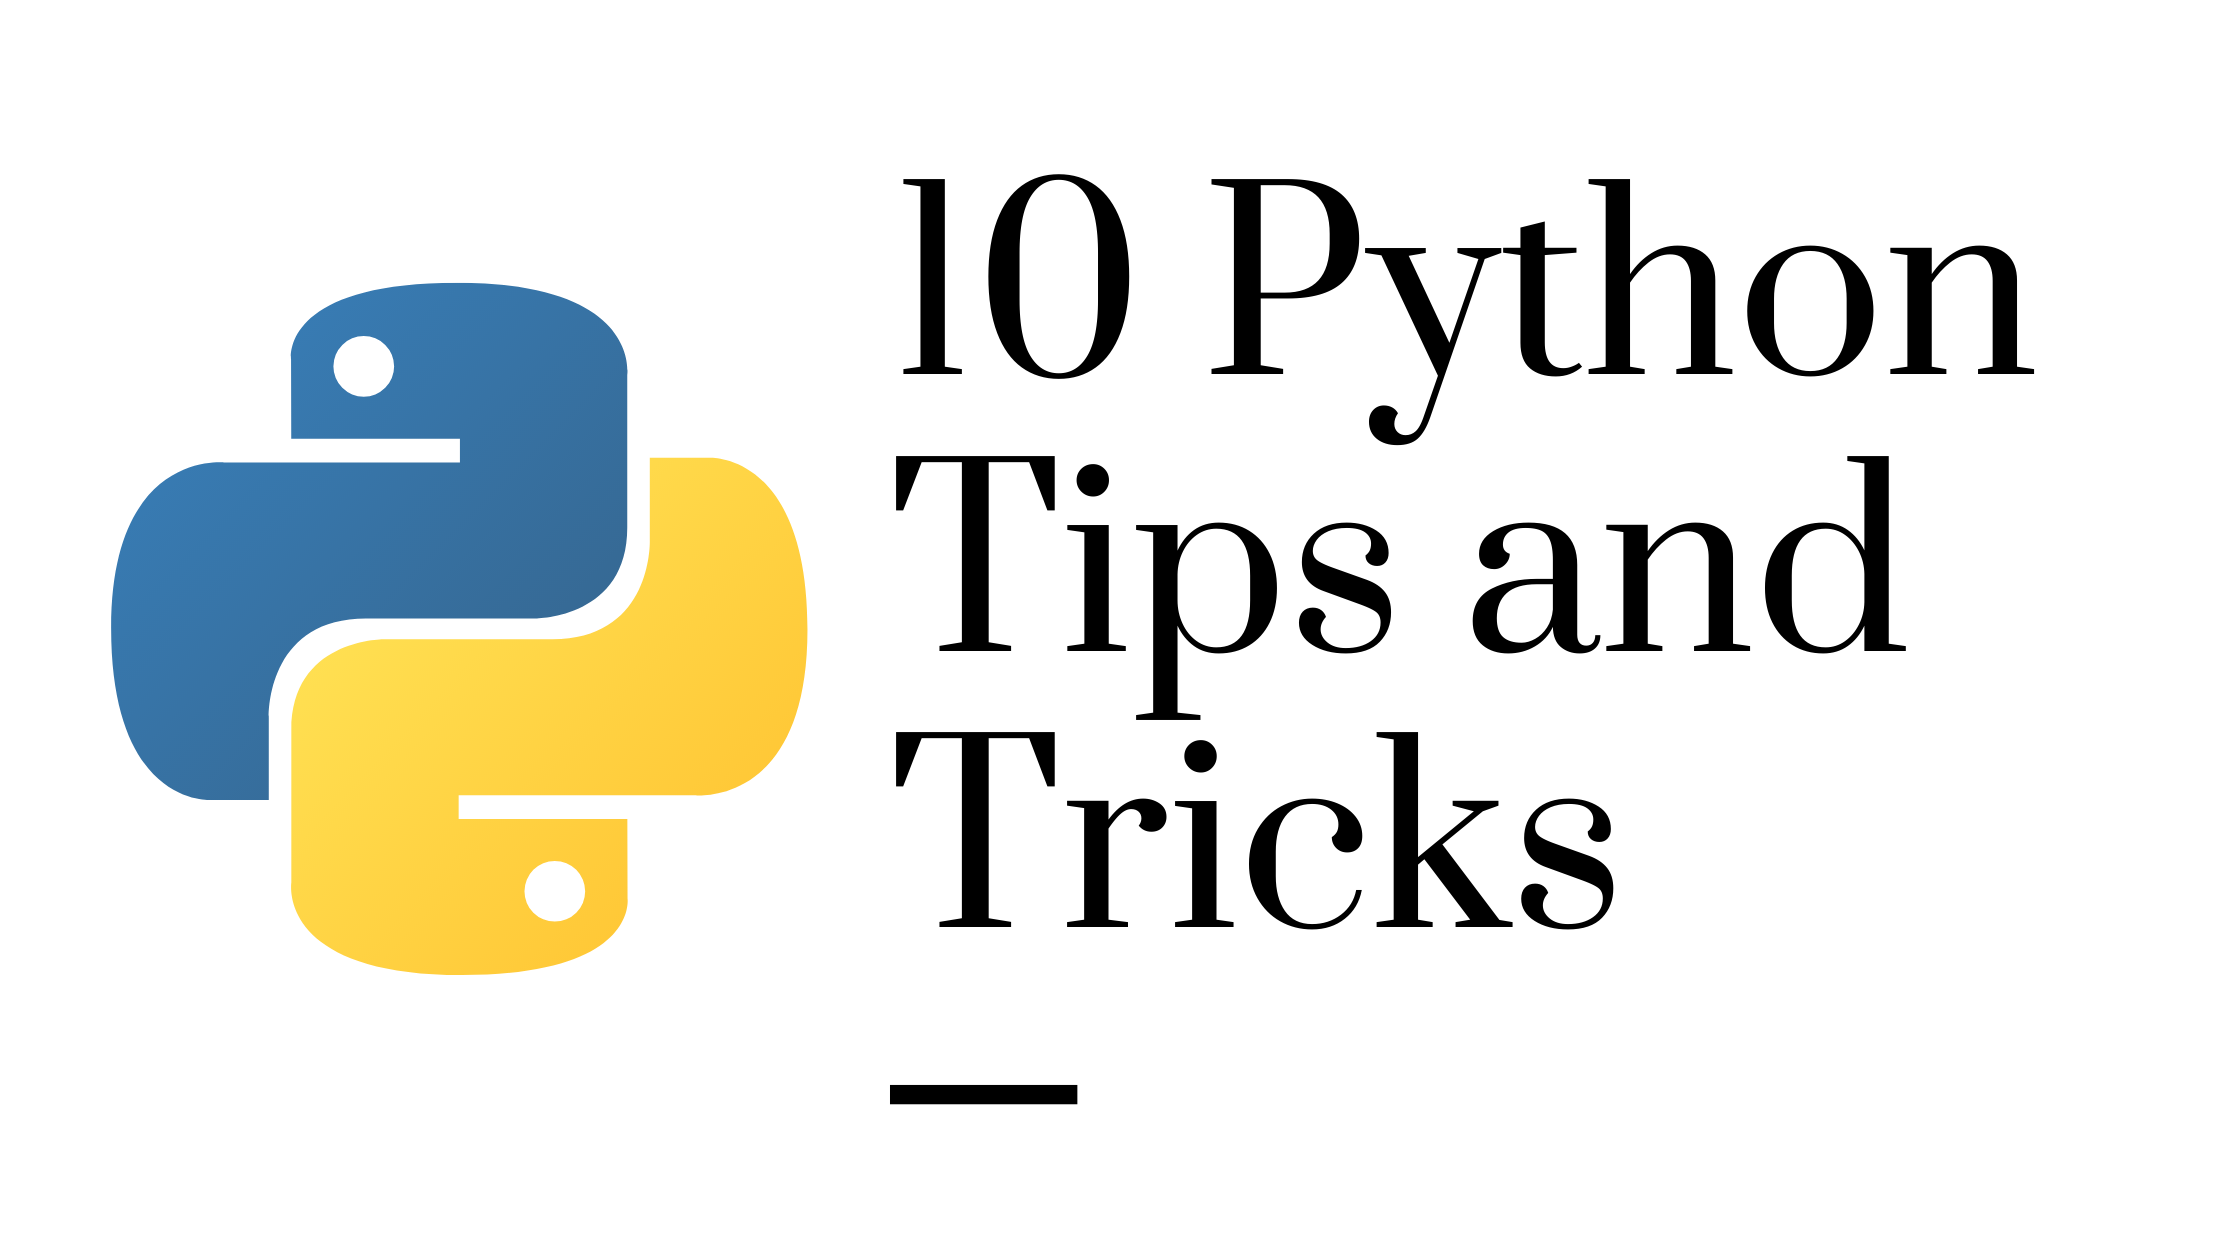 10 Python Tips and Tricks for Beginner and 9th is interesting